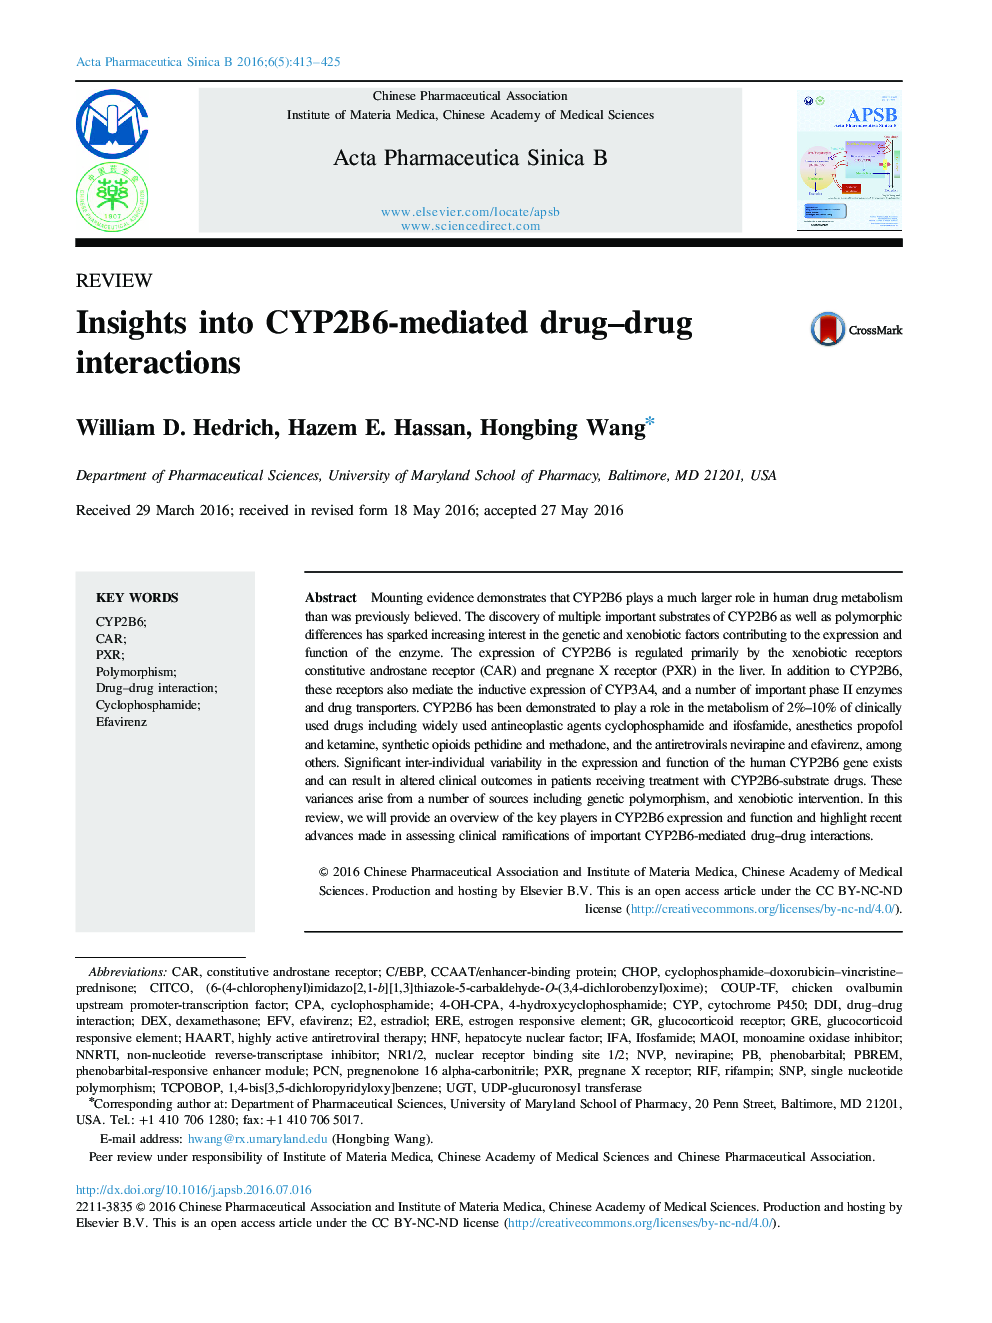 Insights into CYP2B6-mediated drug-drug interactions